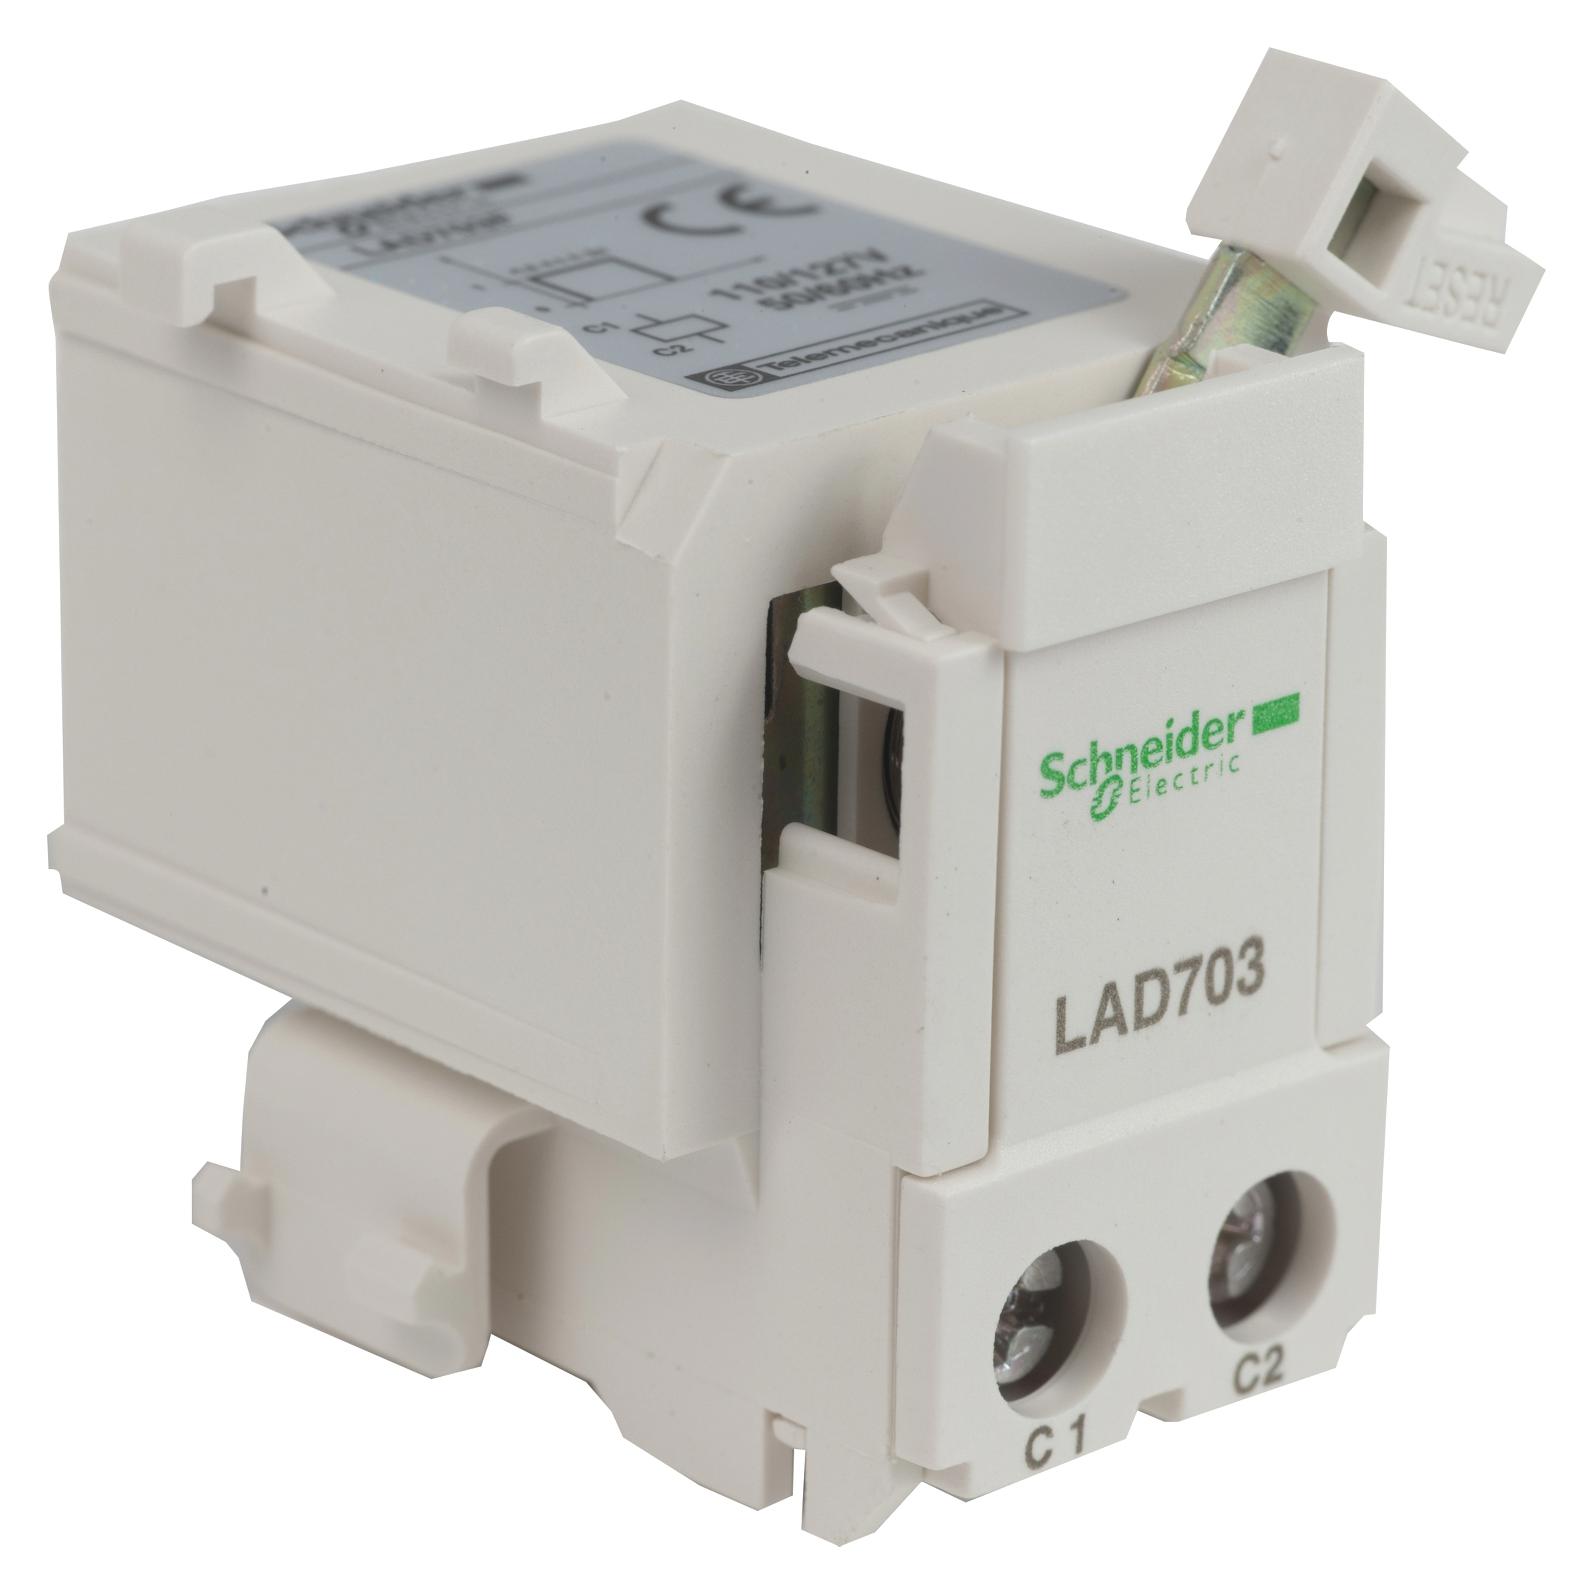 LAD703B THERMAL OVERLOAD RELAY, 24VAC/VDC SCHNEIDER ELECTRIC